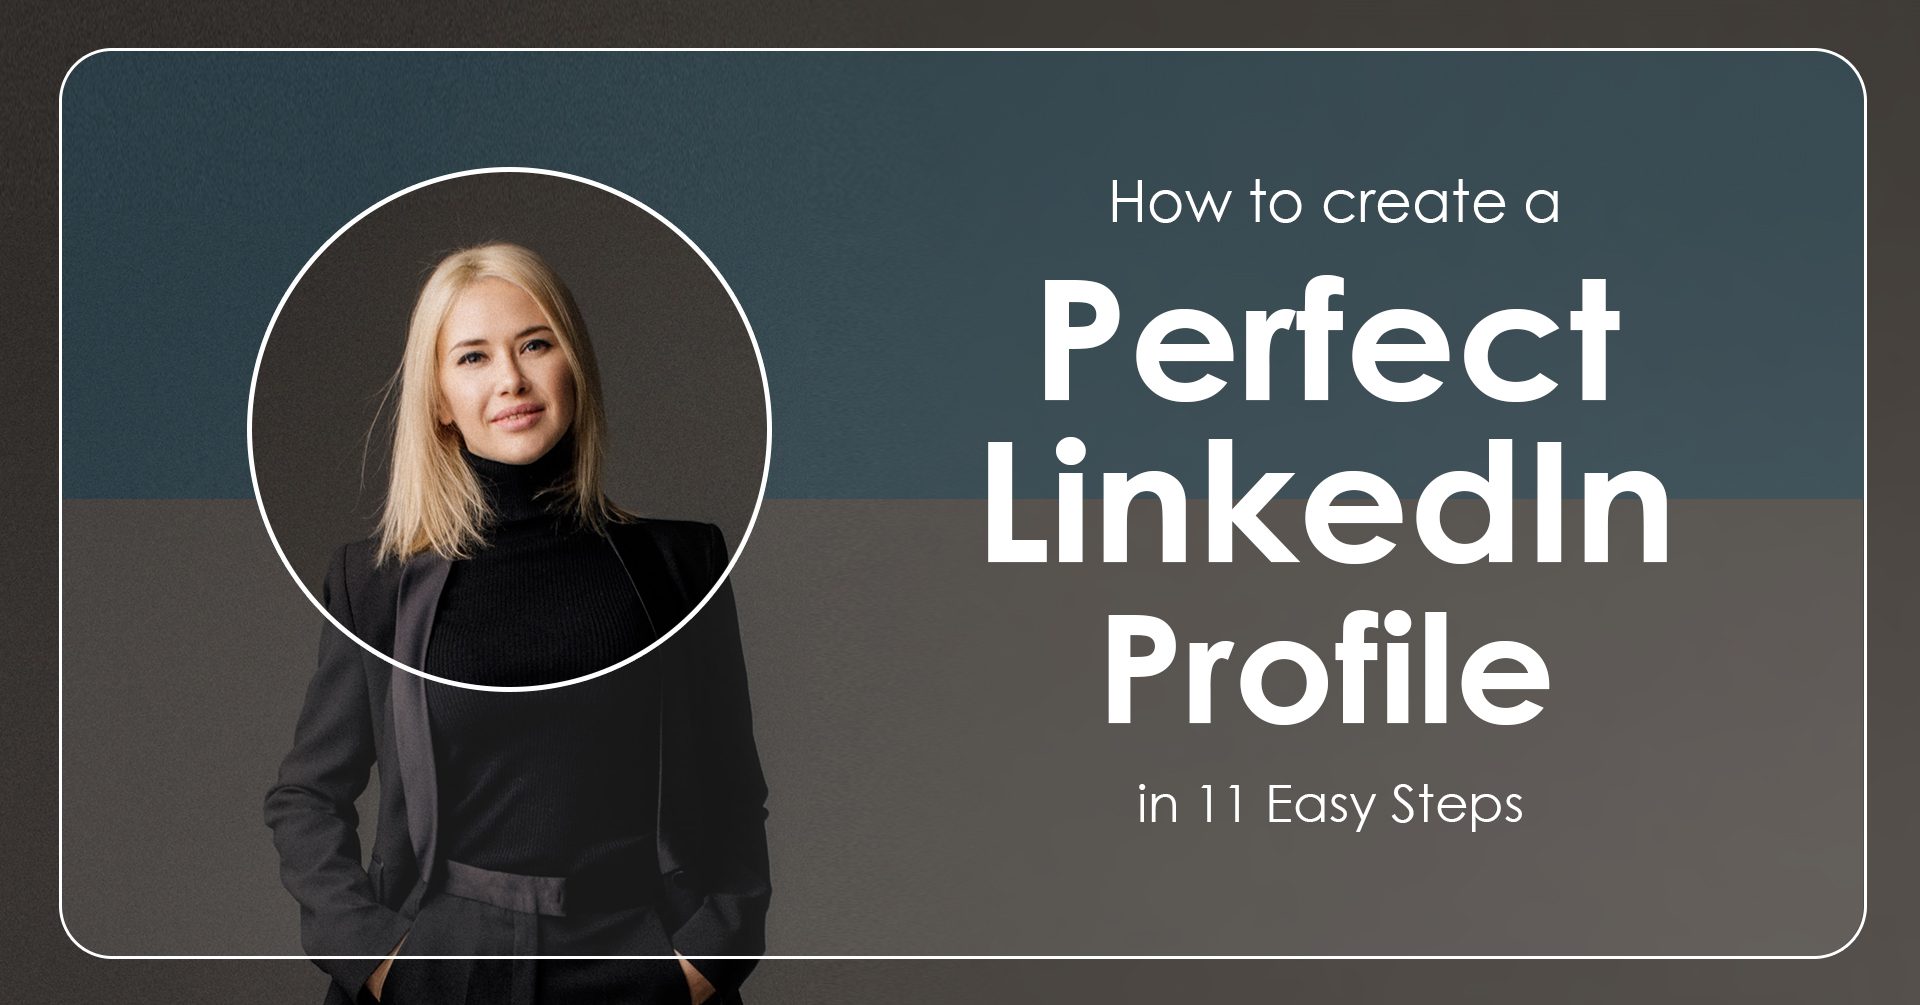 How-to-create-a-perfect-linkedin-profile-cover-image